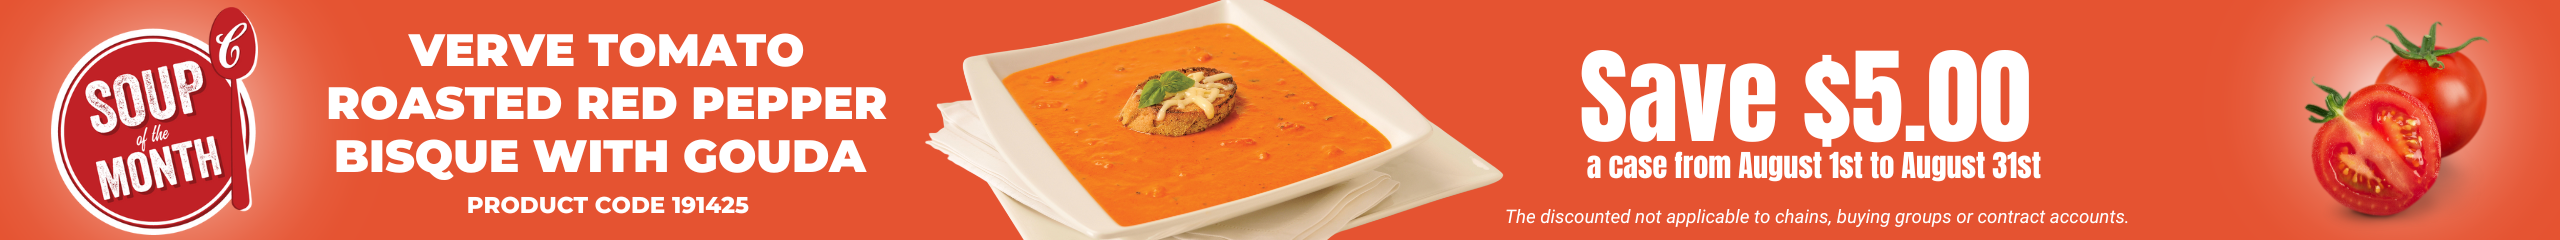 Campbells Soup of the Month-Verve Roasted Red Pepper Bisque